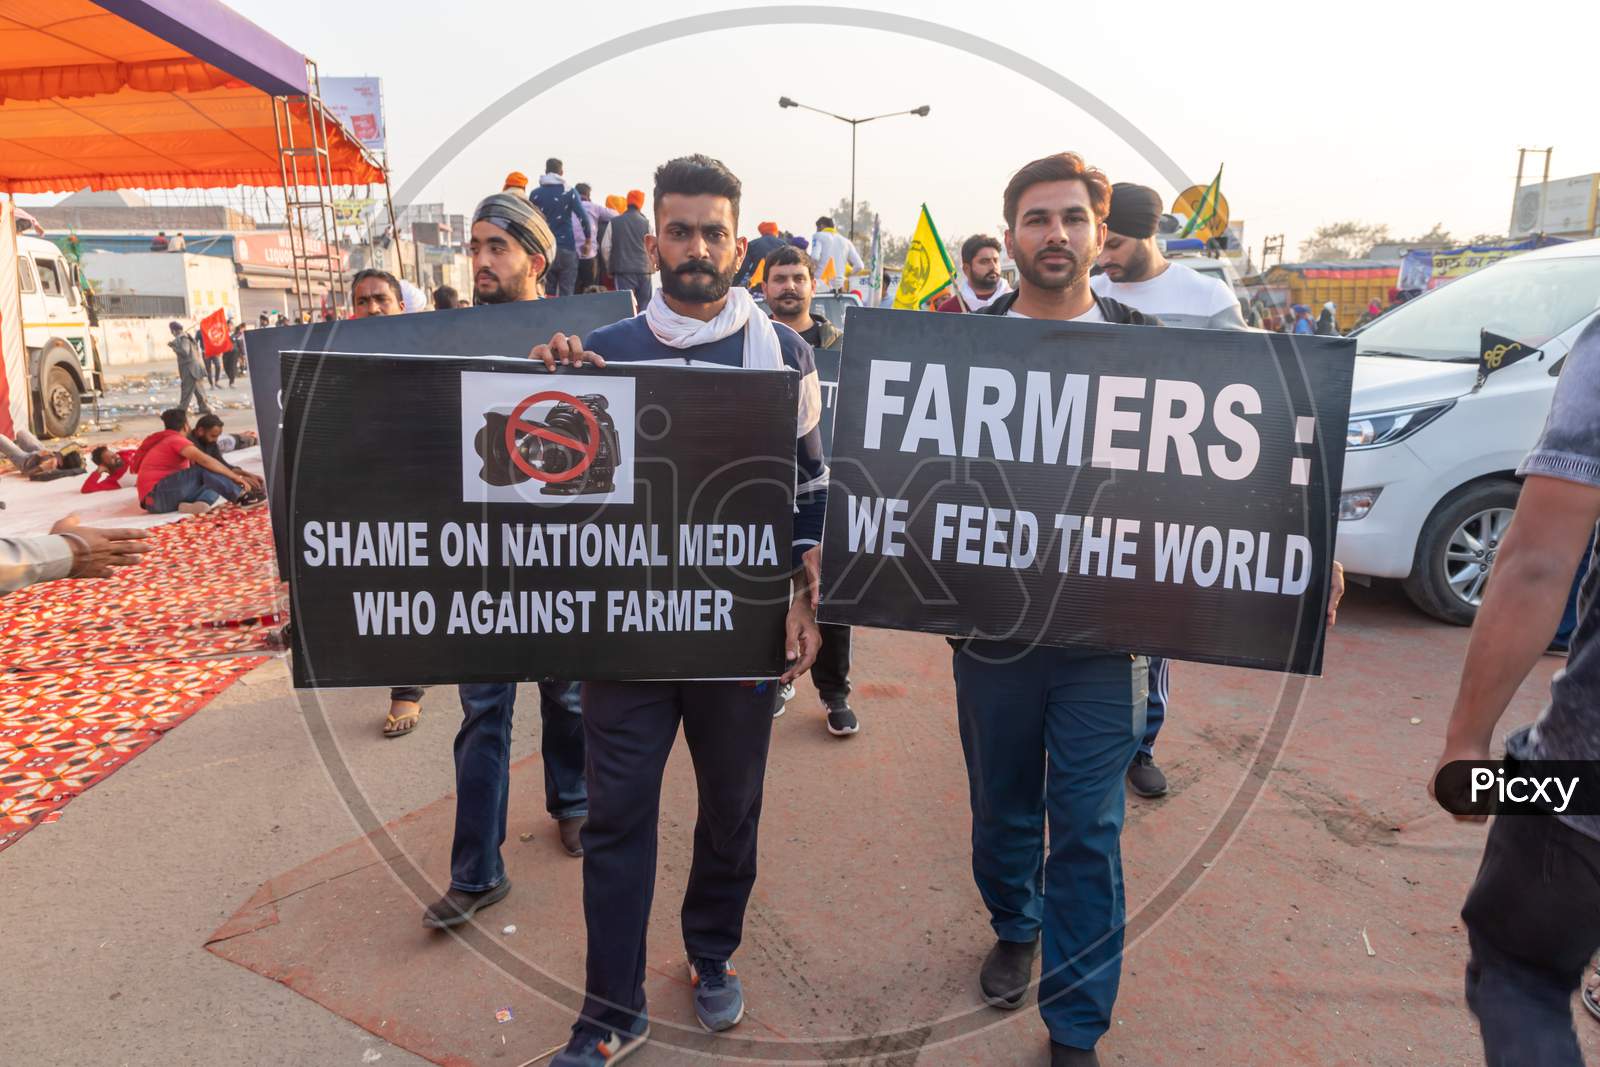 Indian Farmers Are Protesting Against New Farm Law Passed By Indian Government.